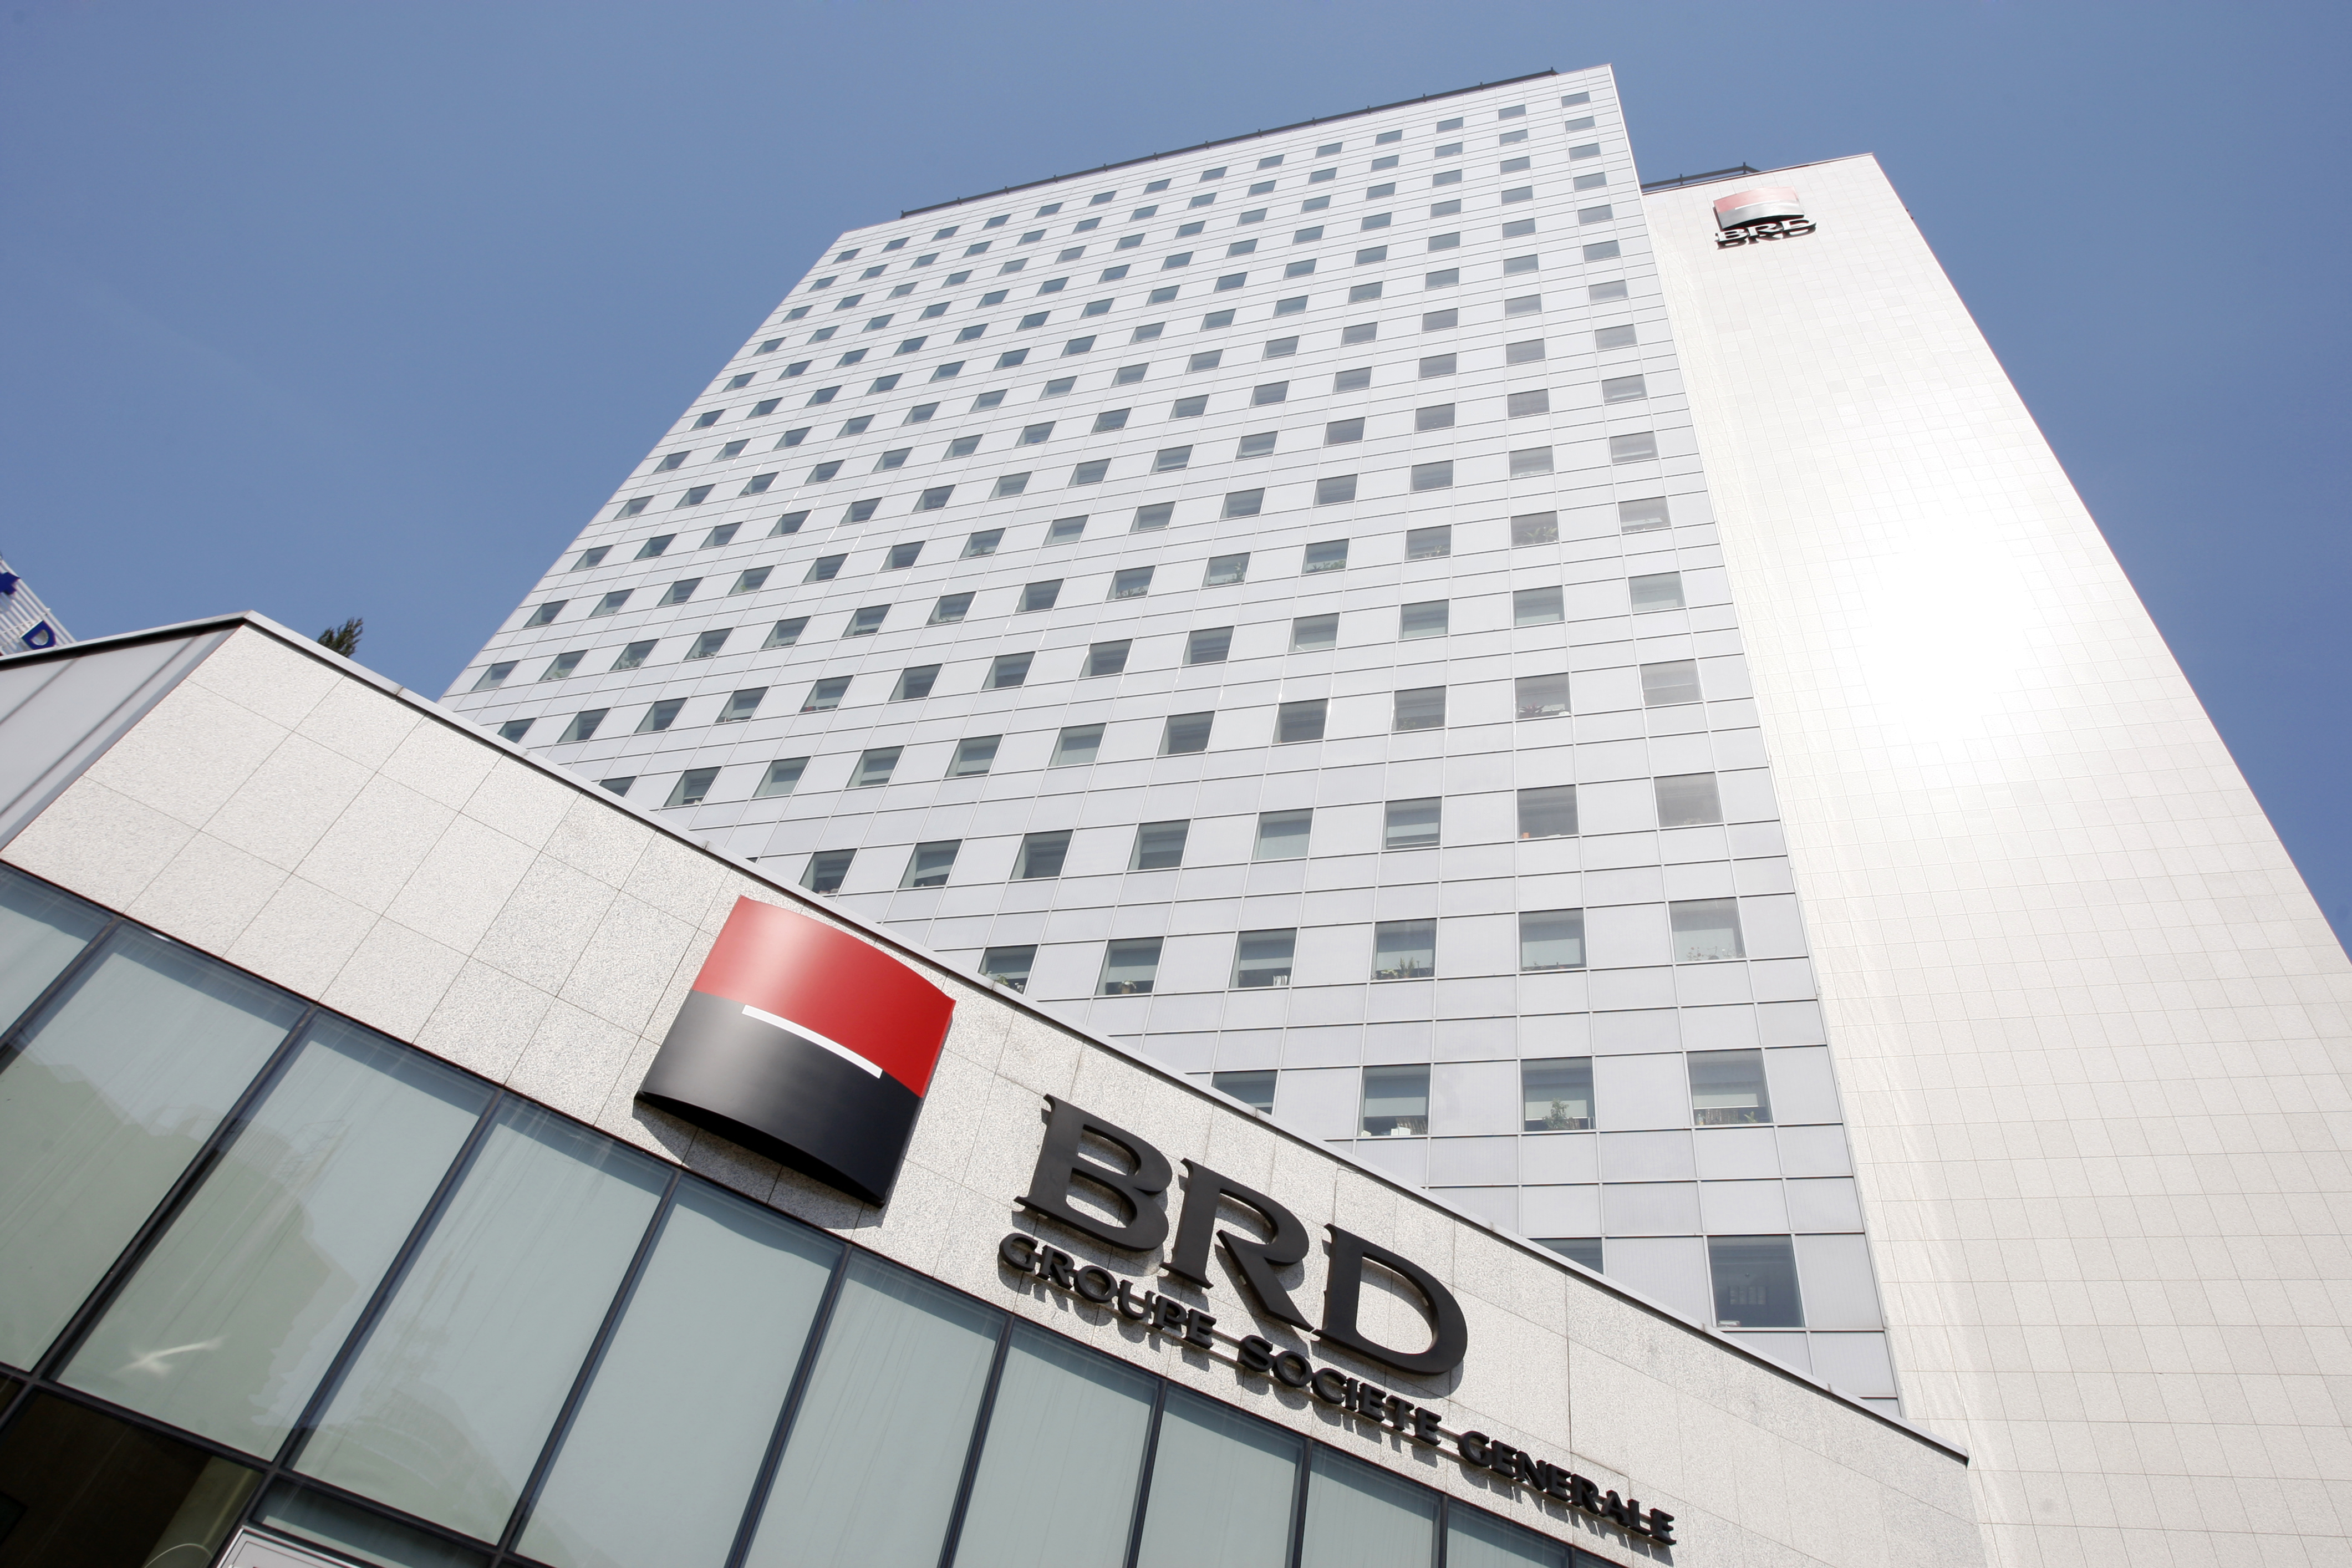 Romania’s BRD bank reports its net profit shrunk by 4.6% y/y in Q1